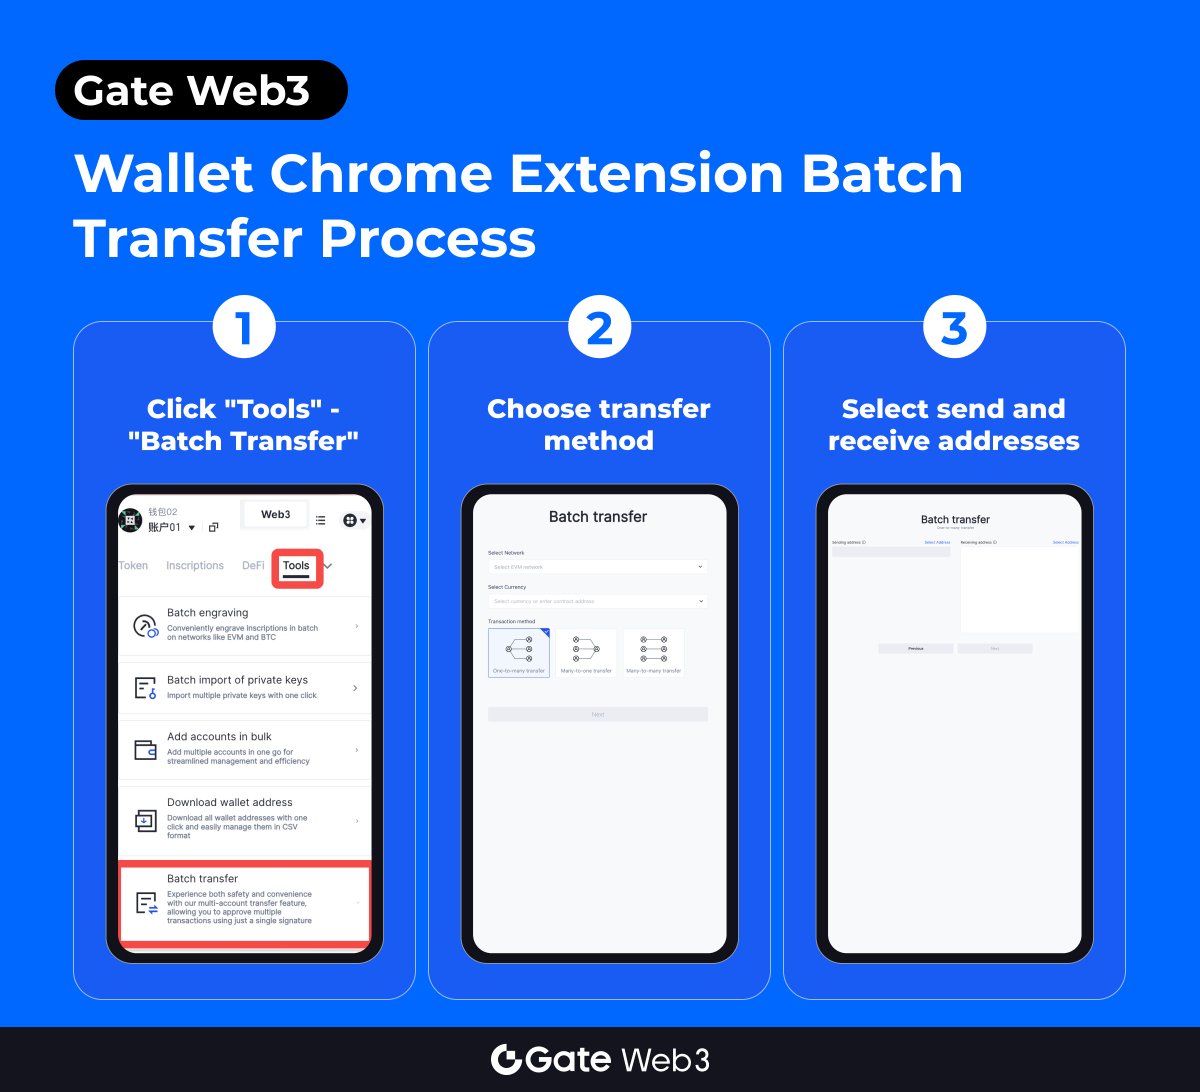 📣 #GateWeb3Wallet Upgraded🎉

💻 Chrome Extension supports #BatchTransfer ！

🤔Batch Transfer only takes 3 steps👇 

#GateWeb3 #BatchTransfer